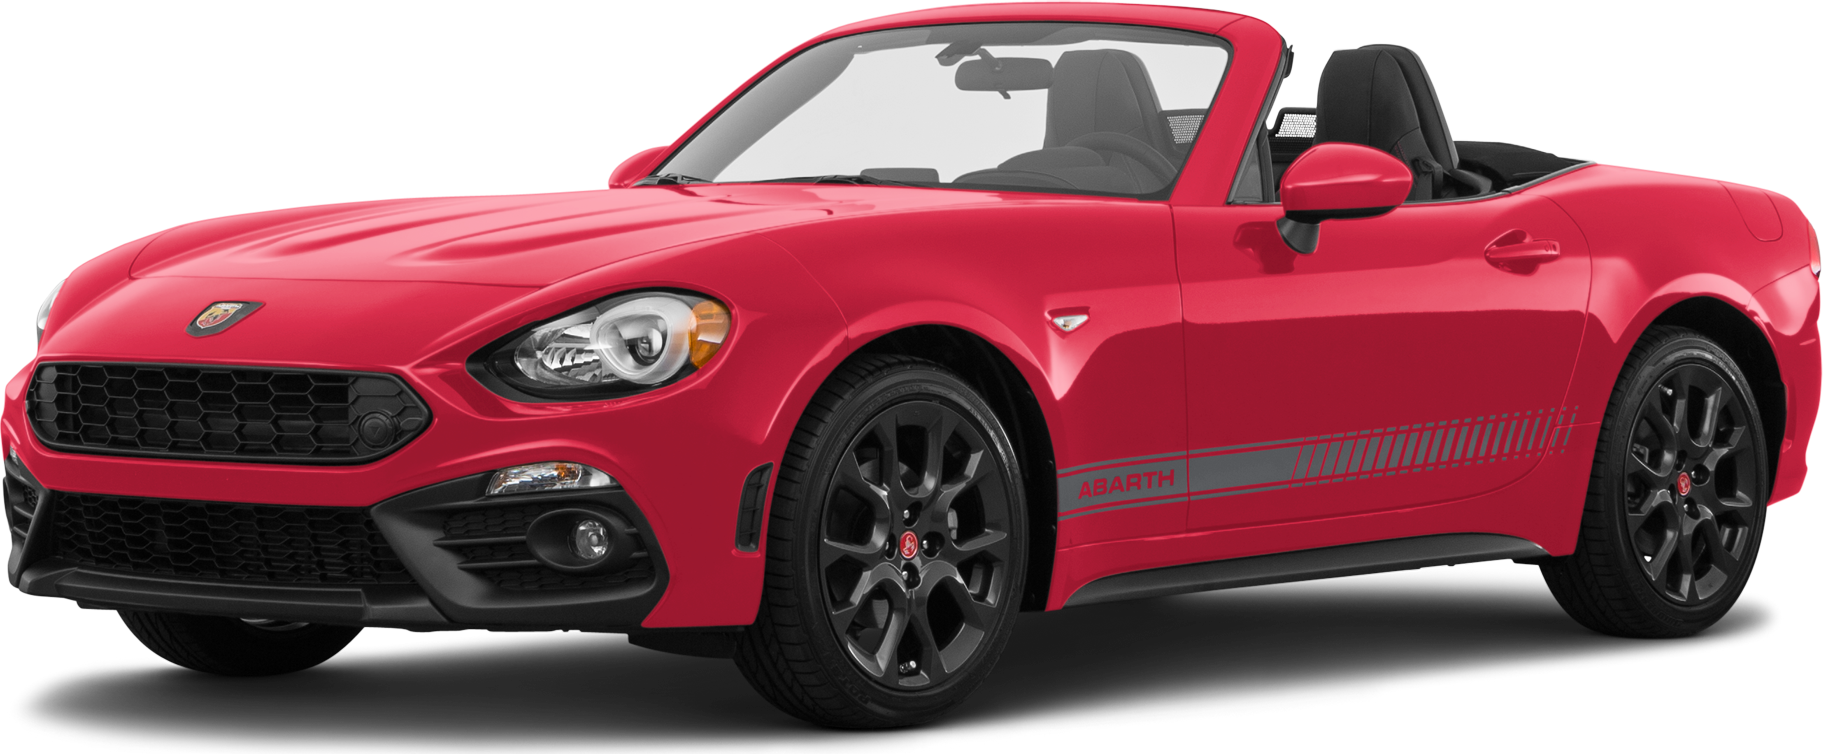 2019 FIAT 124 Spider Values & Cars for Sale Kelley Blue Book